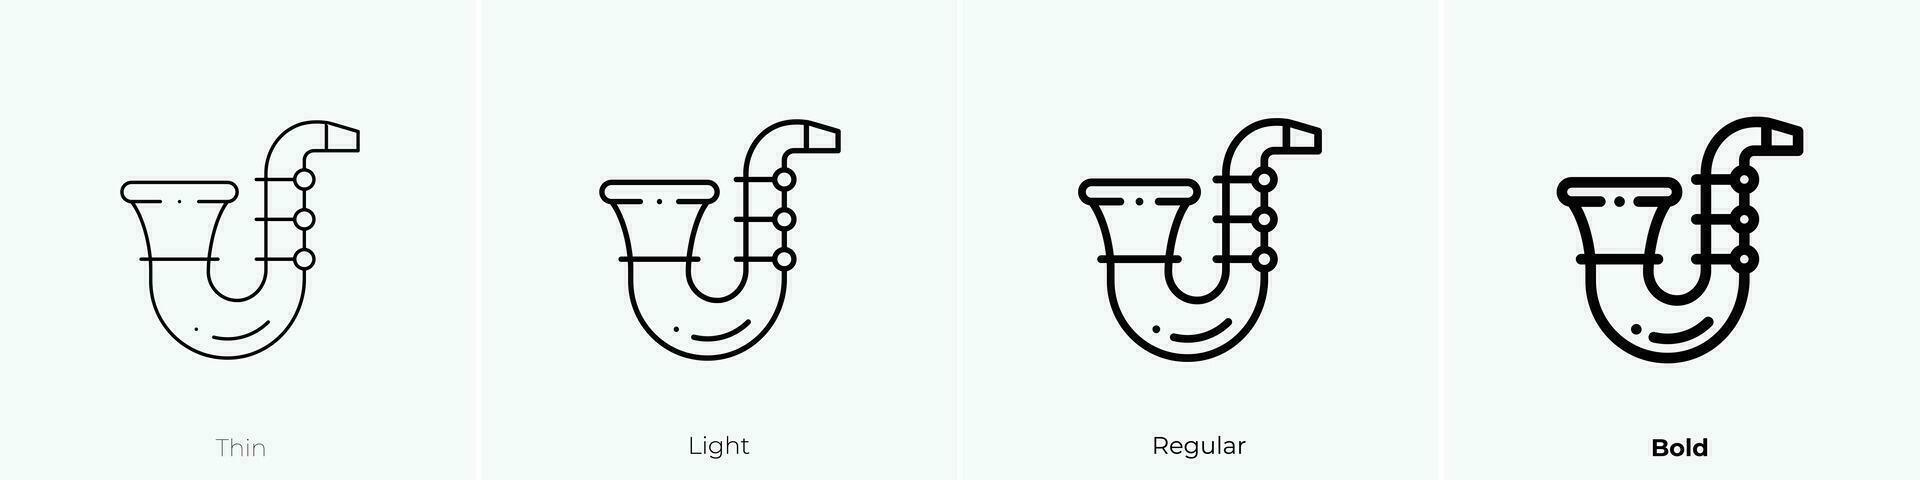 saxophone icon. Thin, Light, Regular And Bold style design isolated on white background vector